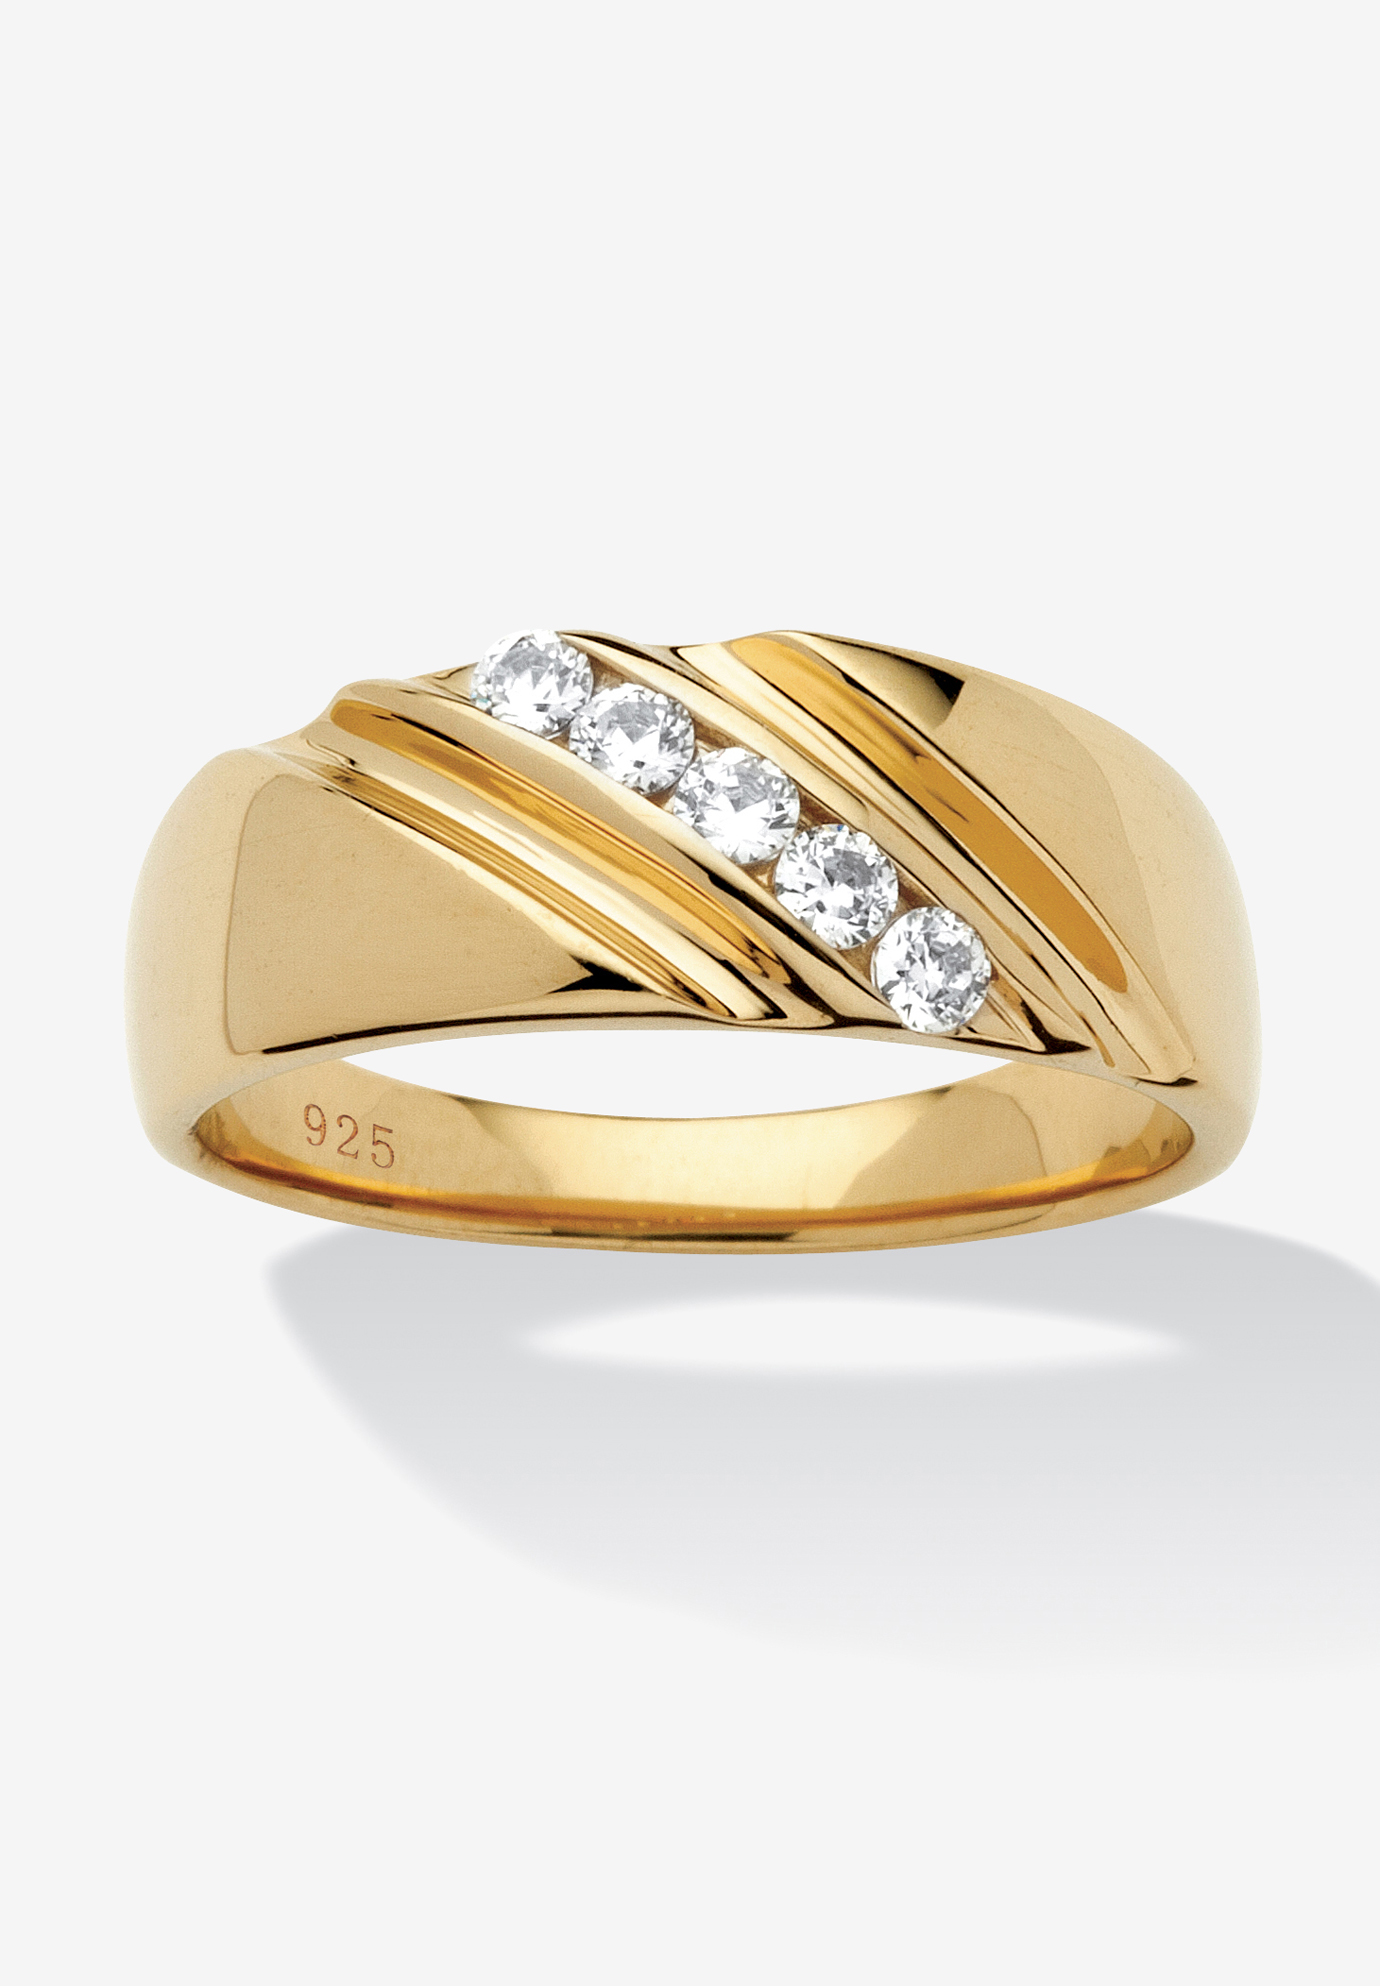 Men&apos;s .50 TCW Cubic Zirconia Diagonal Ring in Gold-Plated Sterling Silver, 